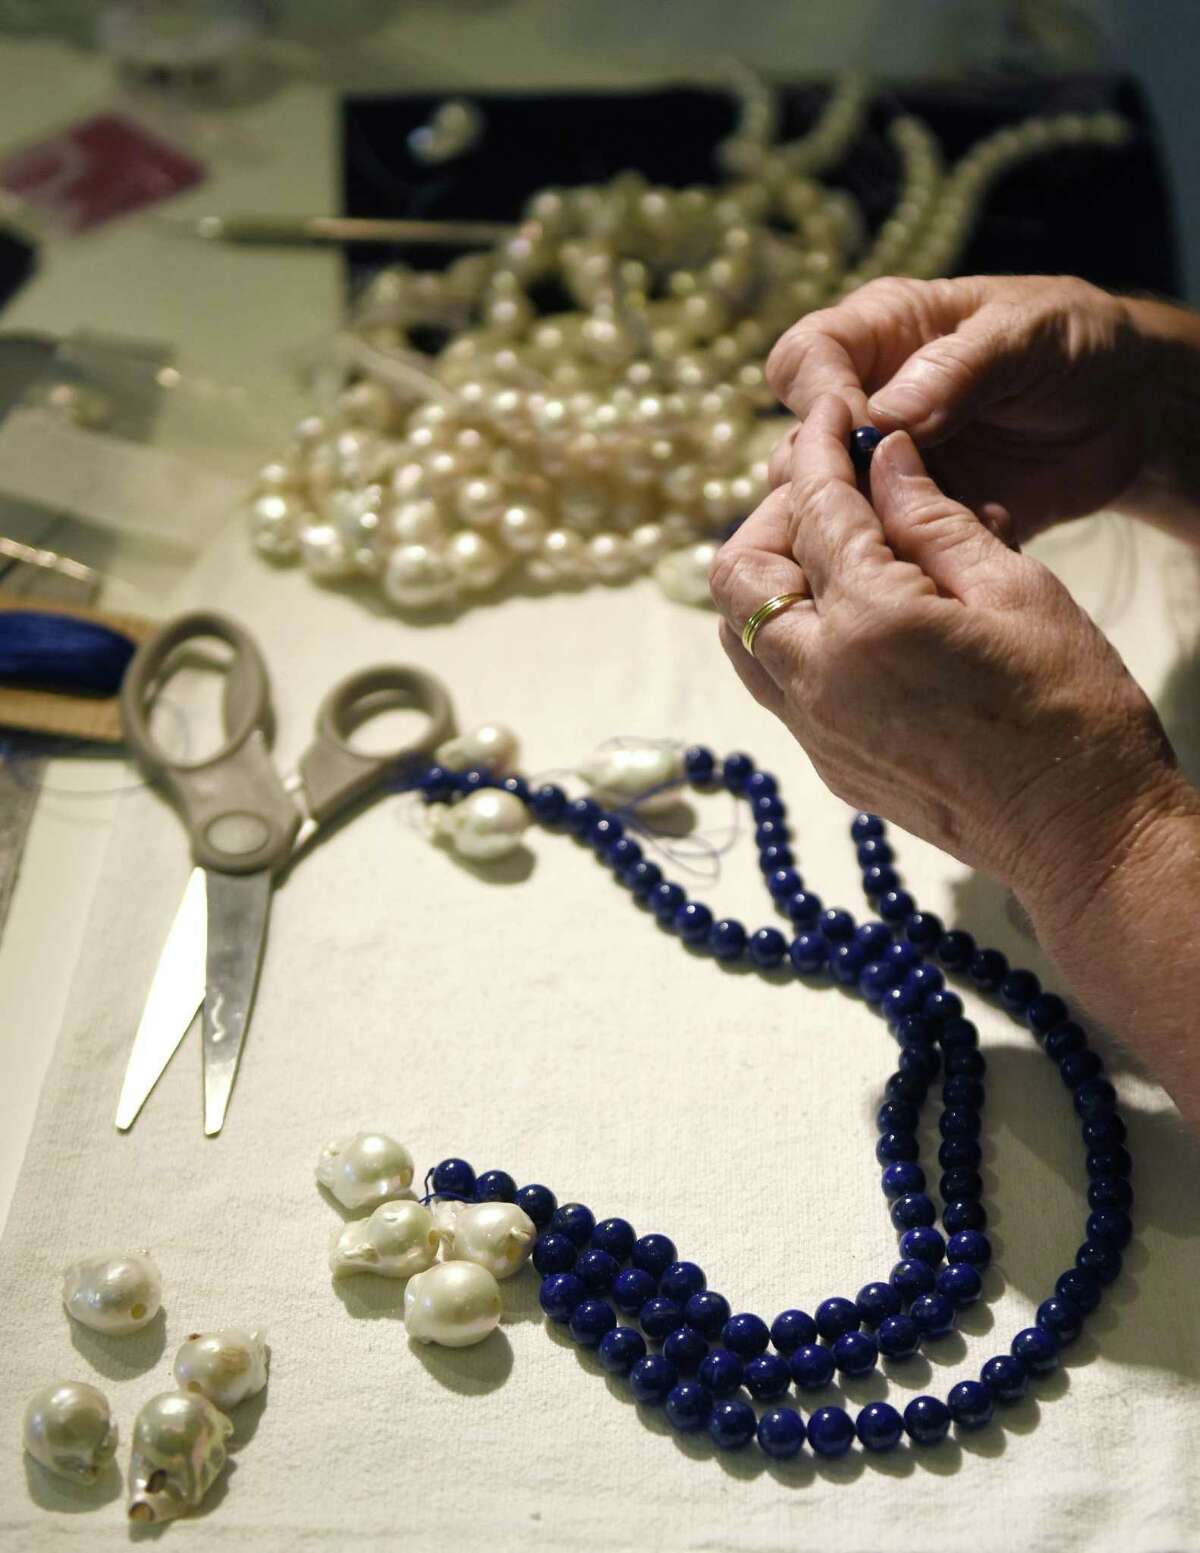 Expert pearl stringer Renee Courtney threads a pearl necklace at Barbara Harris Water Jewels in Greenwich, Conn. Monday, July 10, 2017. Courtney is working in the shop three days a week to customize, rework and restring jewelery for Harris and customers.